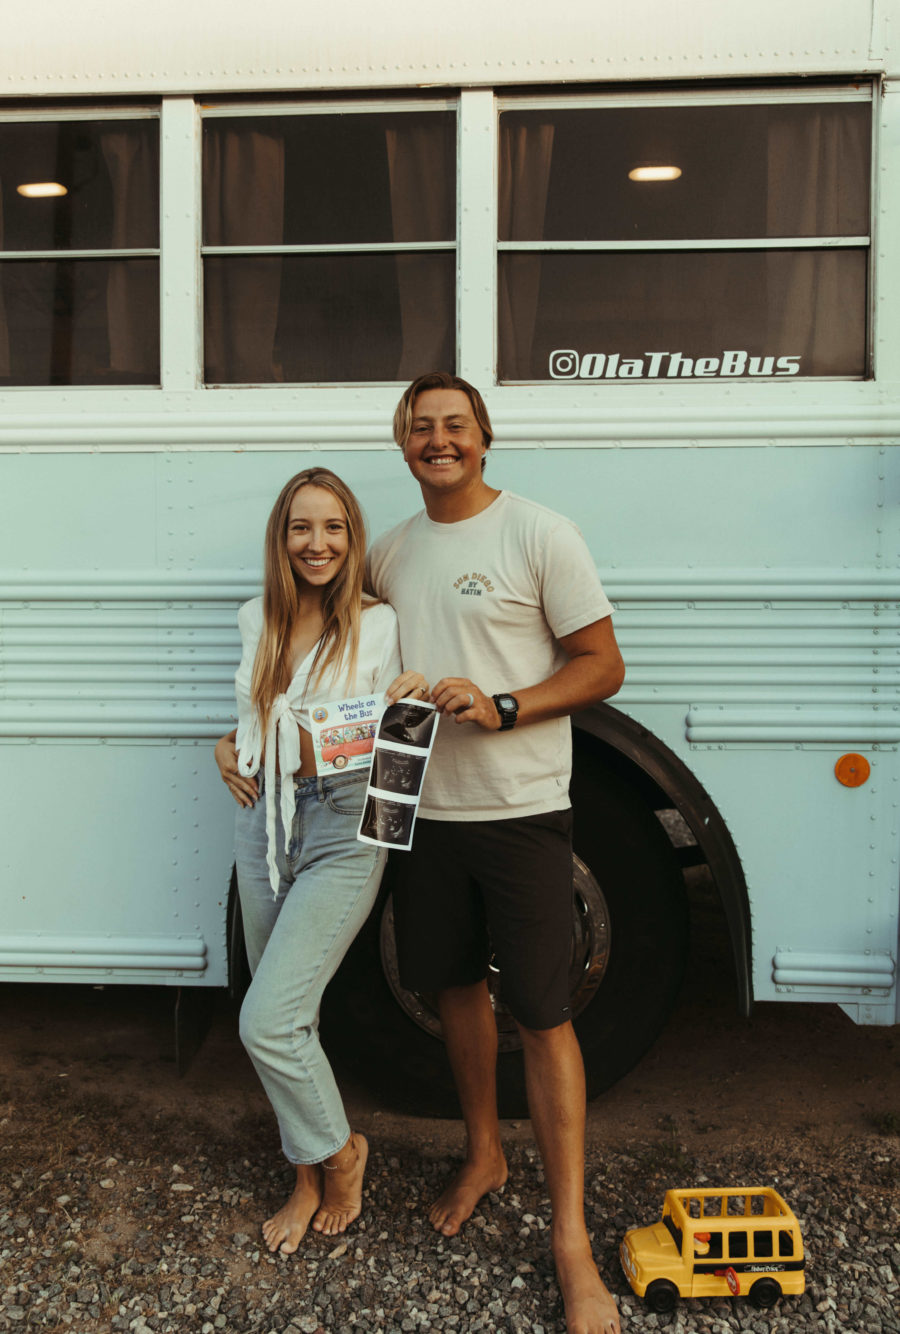 They Got Married in College & Moved Into Their Converted Bus! 2